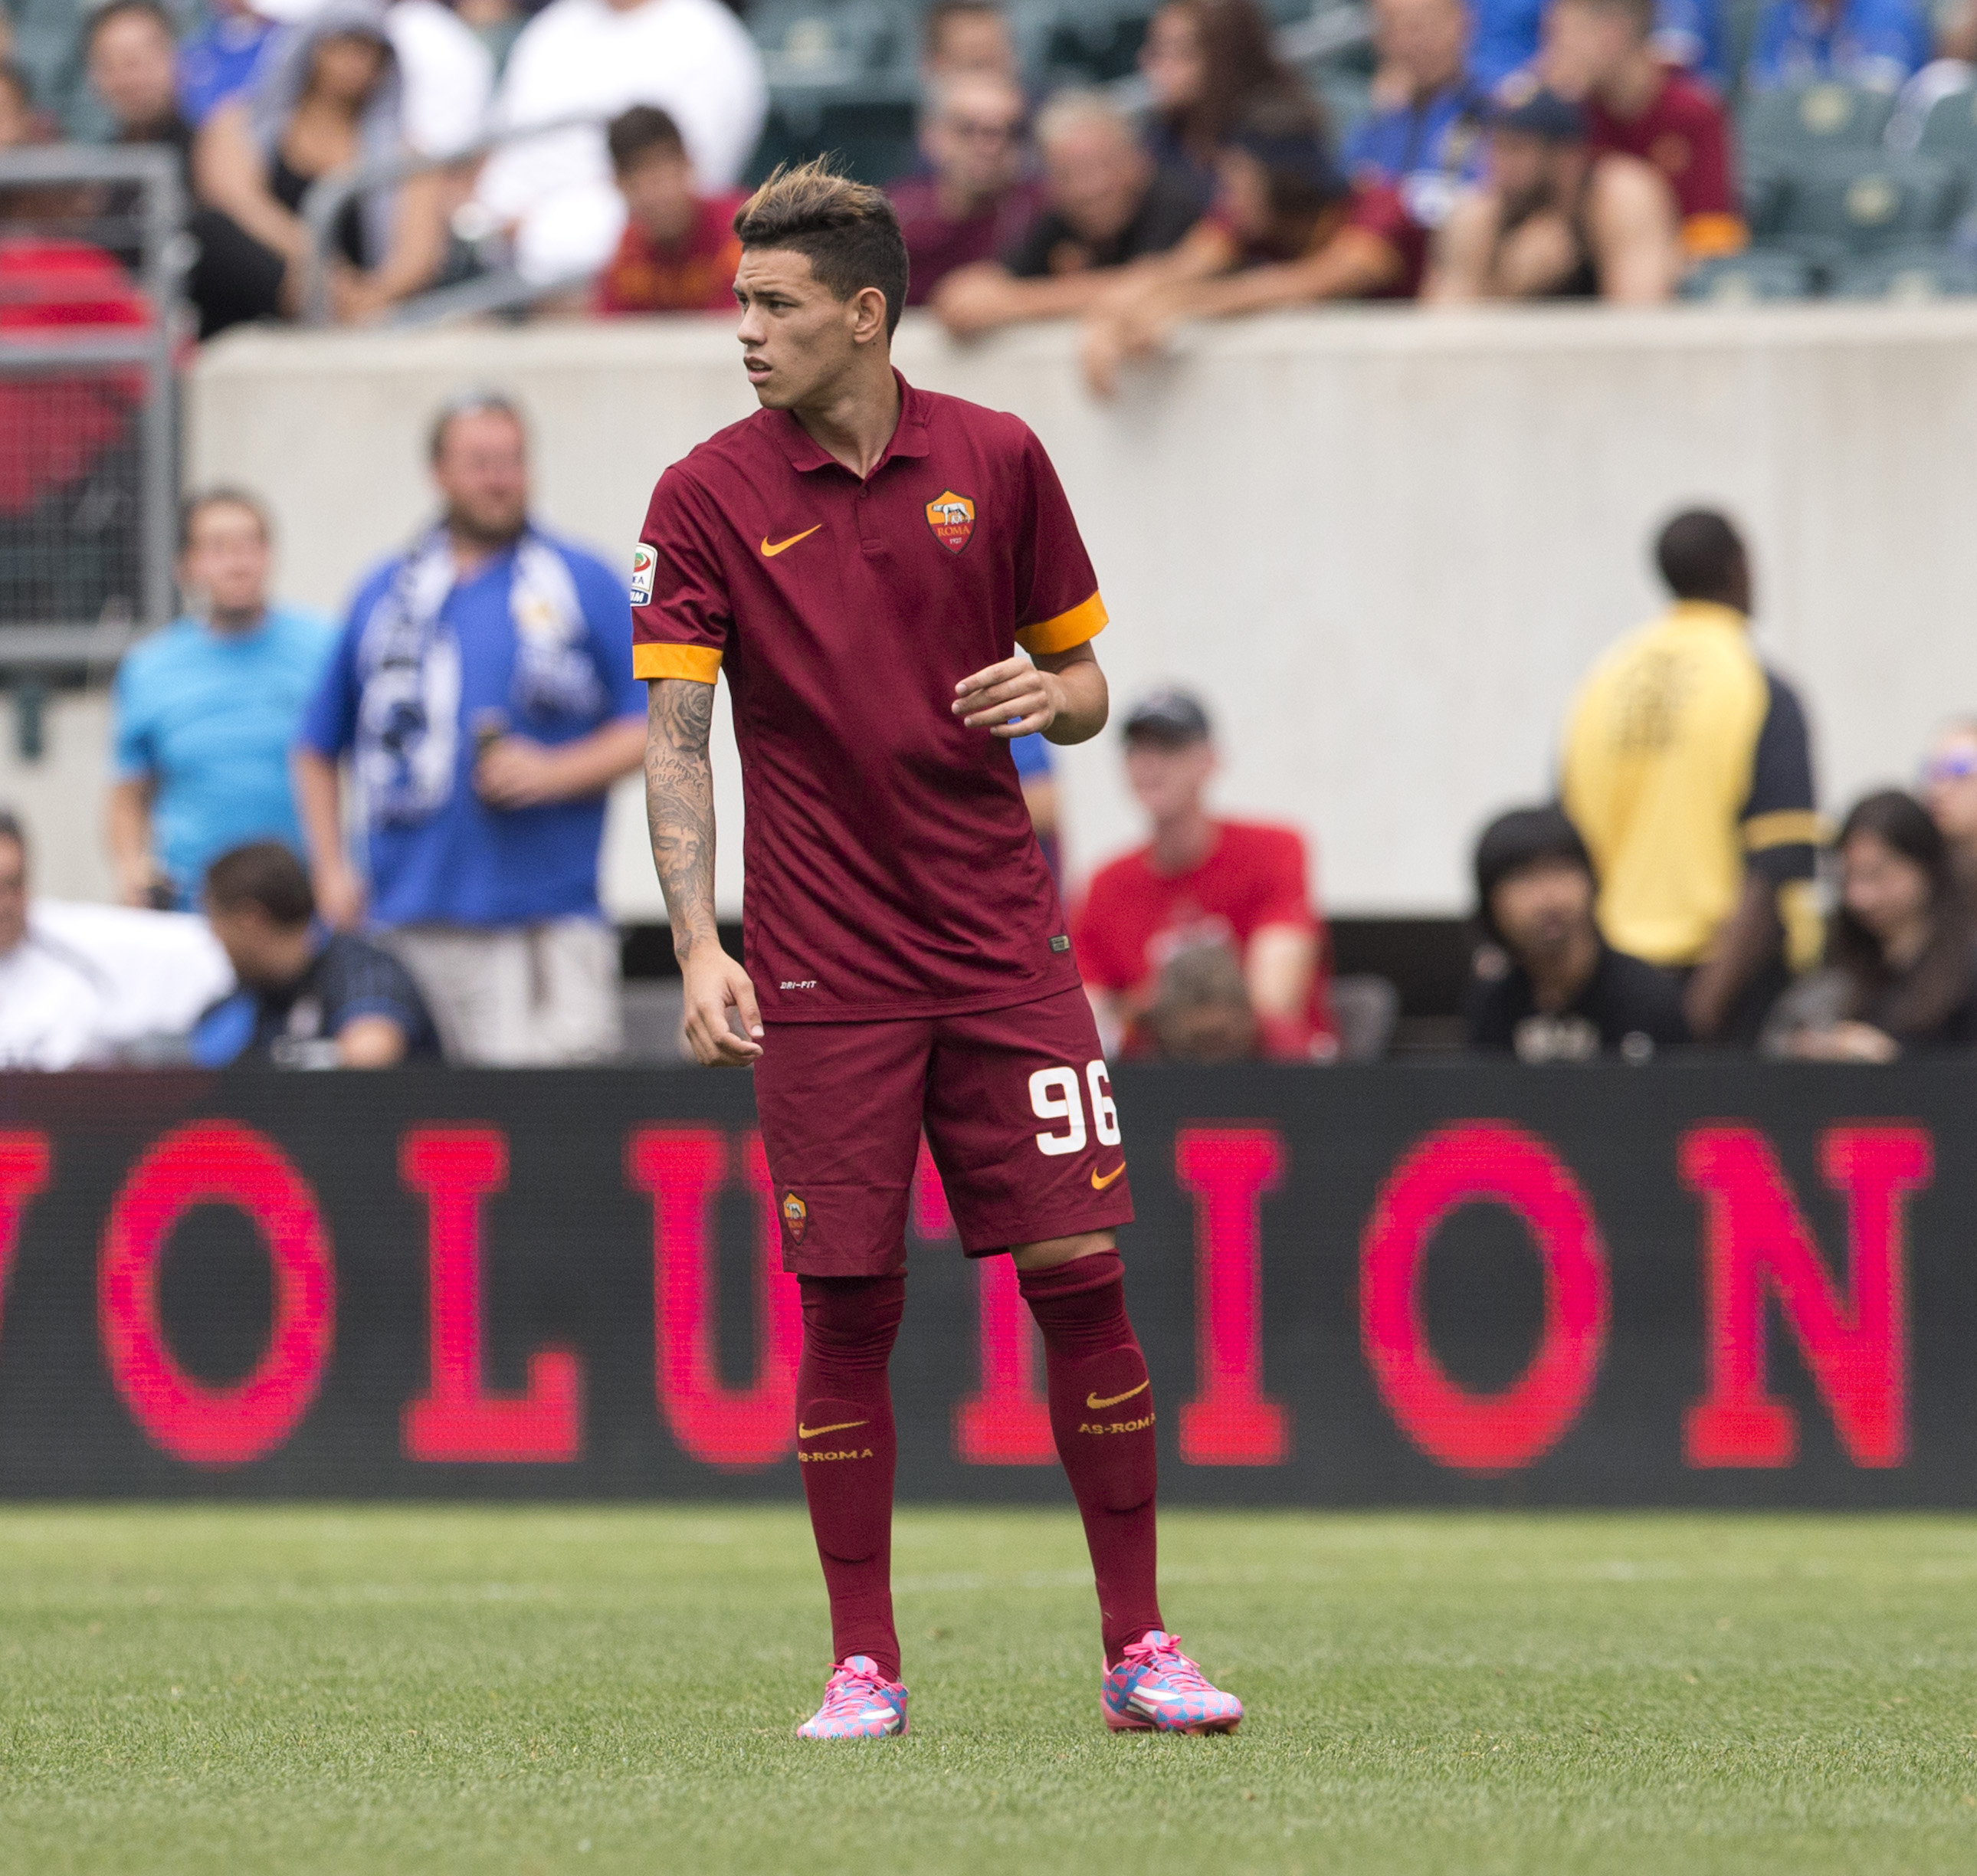 PHILADELPHIA, PA - AUGUST 2: Forward Antonio Sanabria #96 of AS Roma participates in the match against FC Internazionale Milano during the International Champions Cup on August 2, 2014 at Lincoln Financial Field in Philadelphia, Pennsylvania. (Photo by Mitchell Leff/Getty Images)